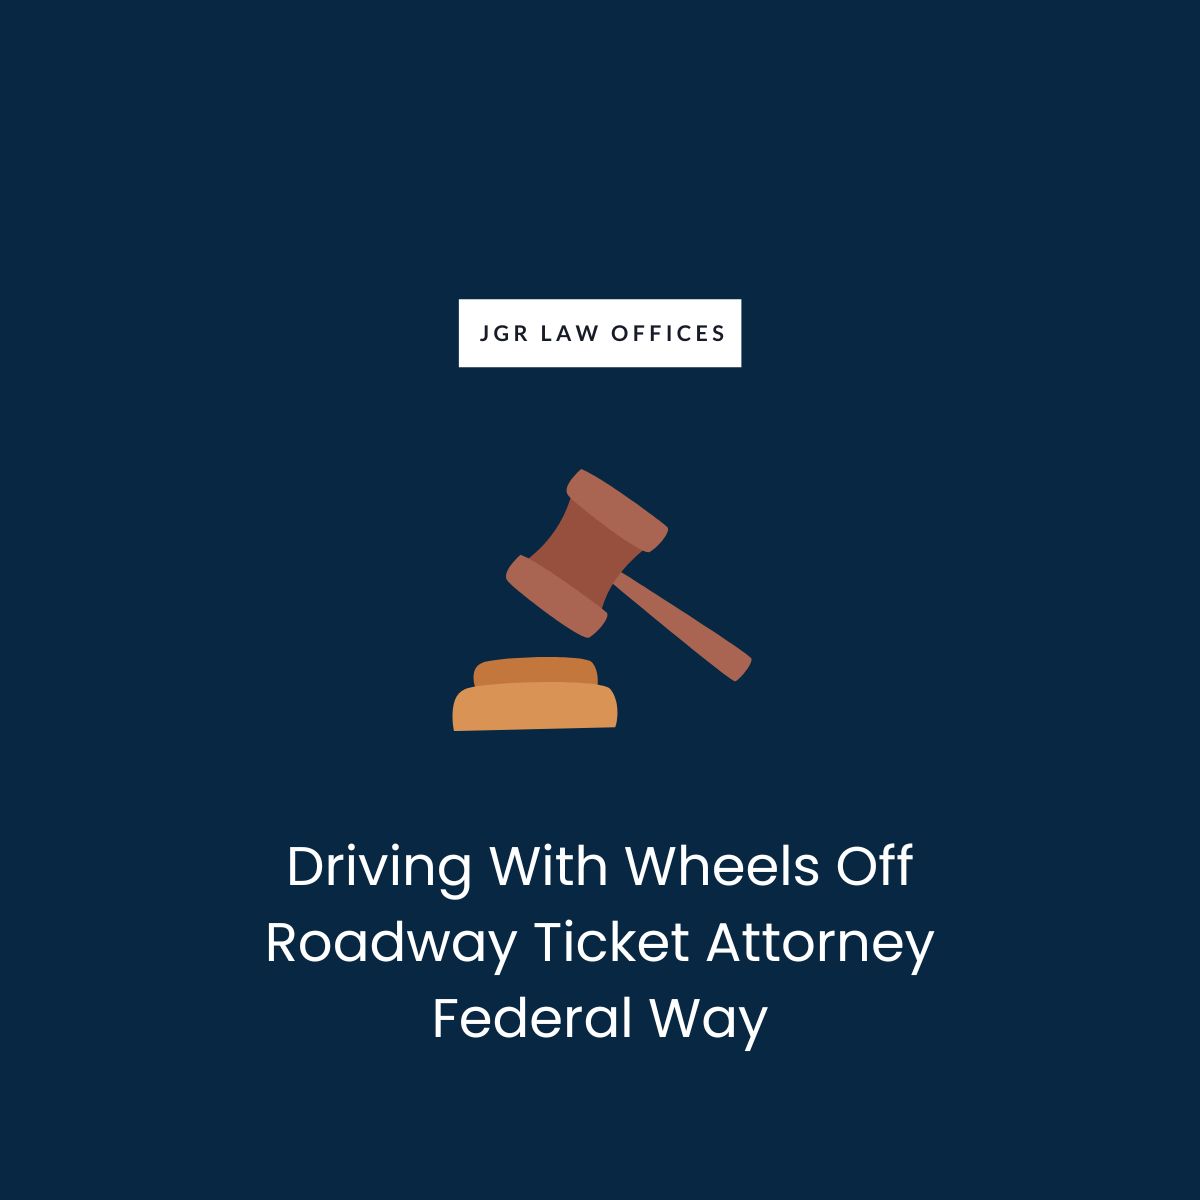 Driving With Wheels Off Roadway Ticket Attorney Federal Way